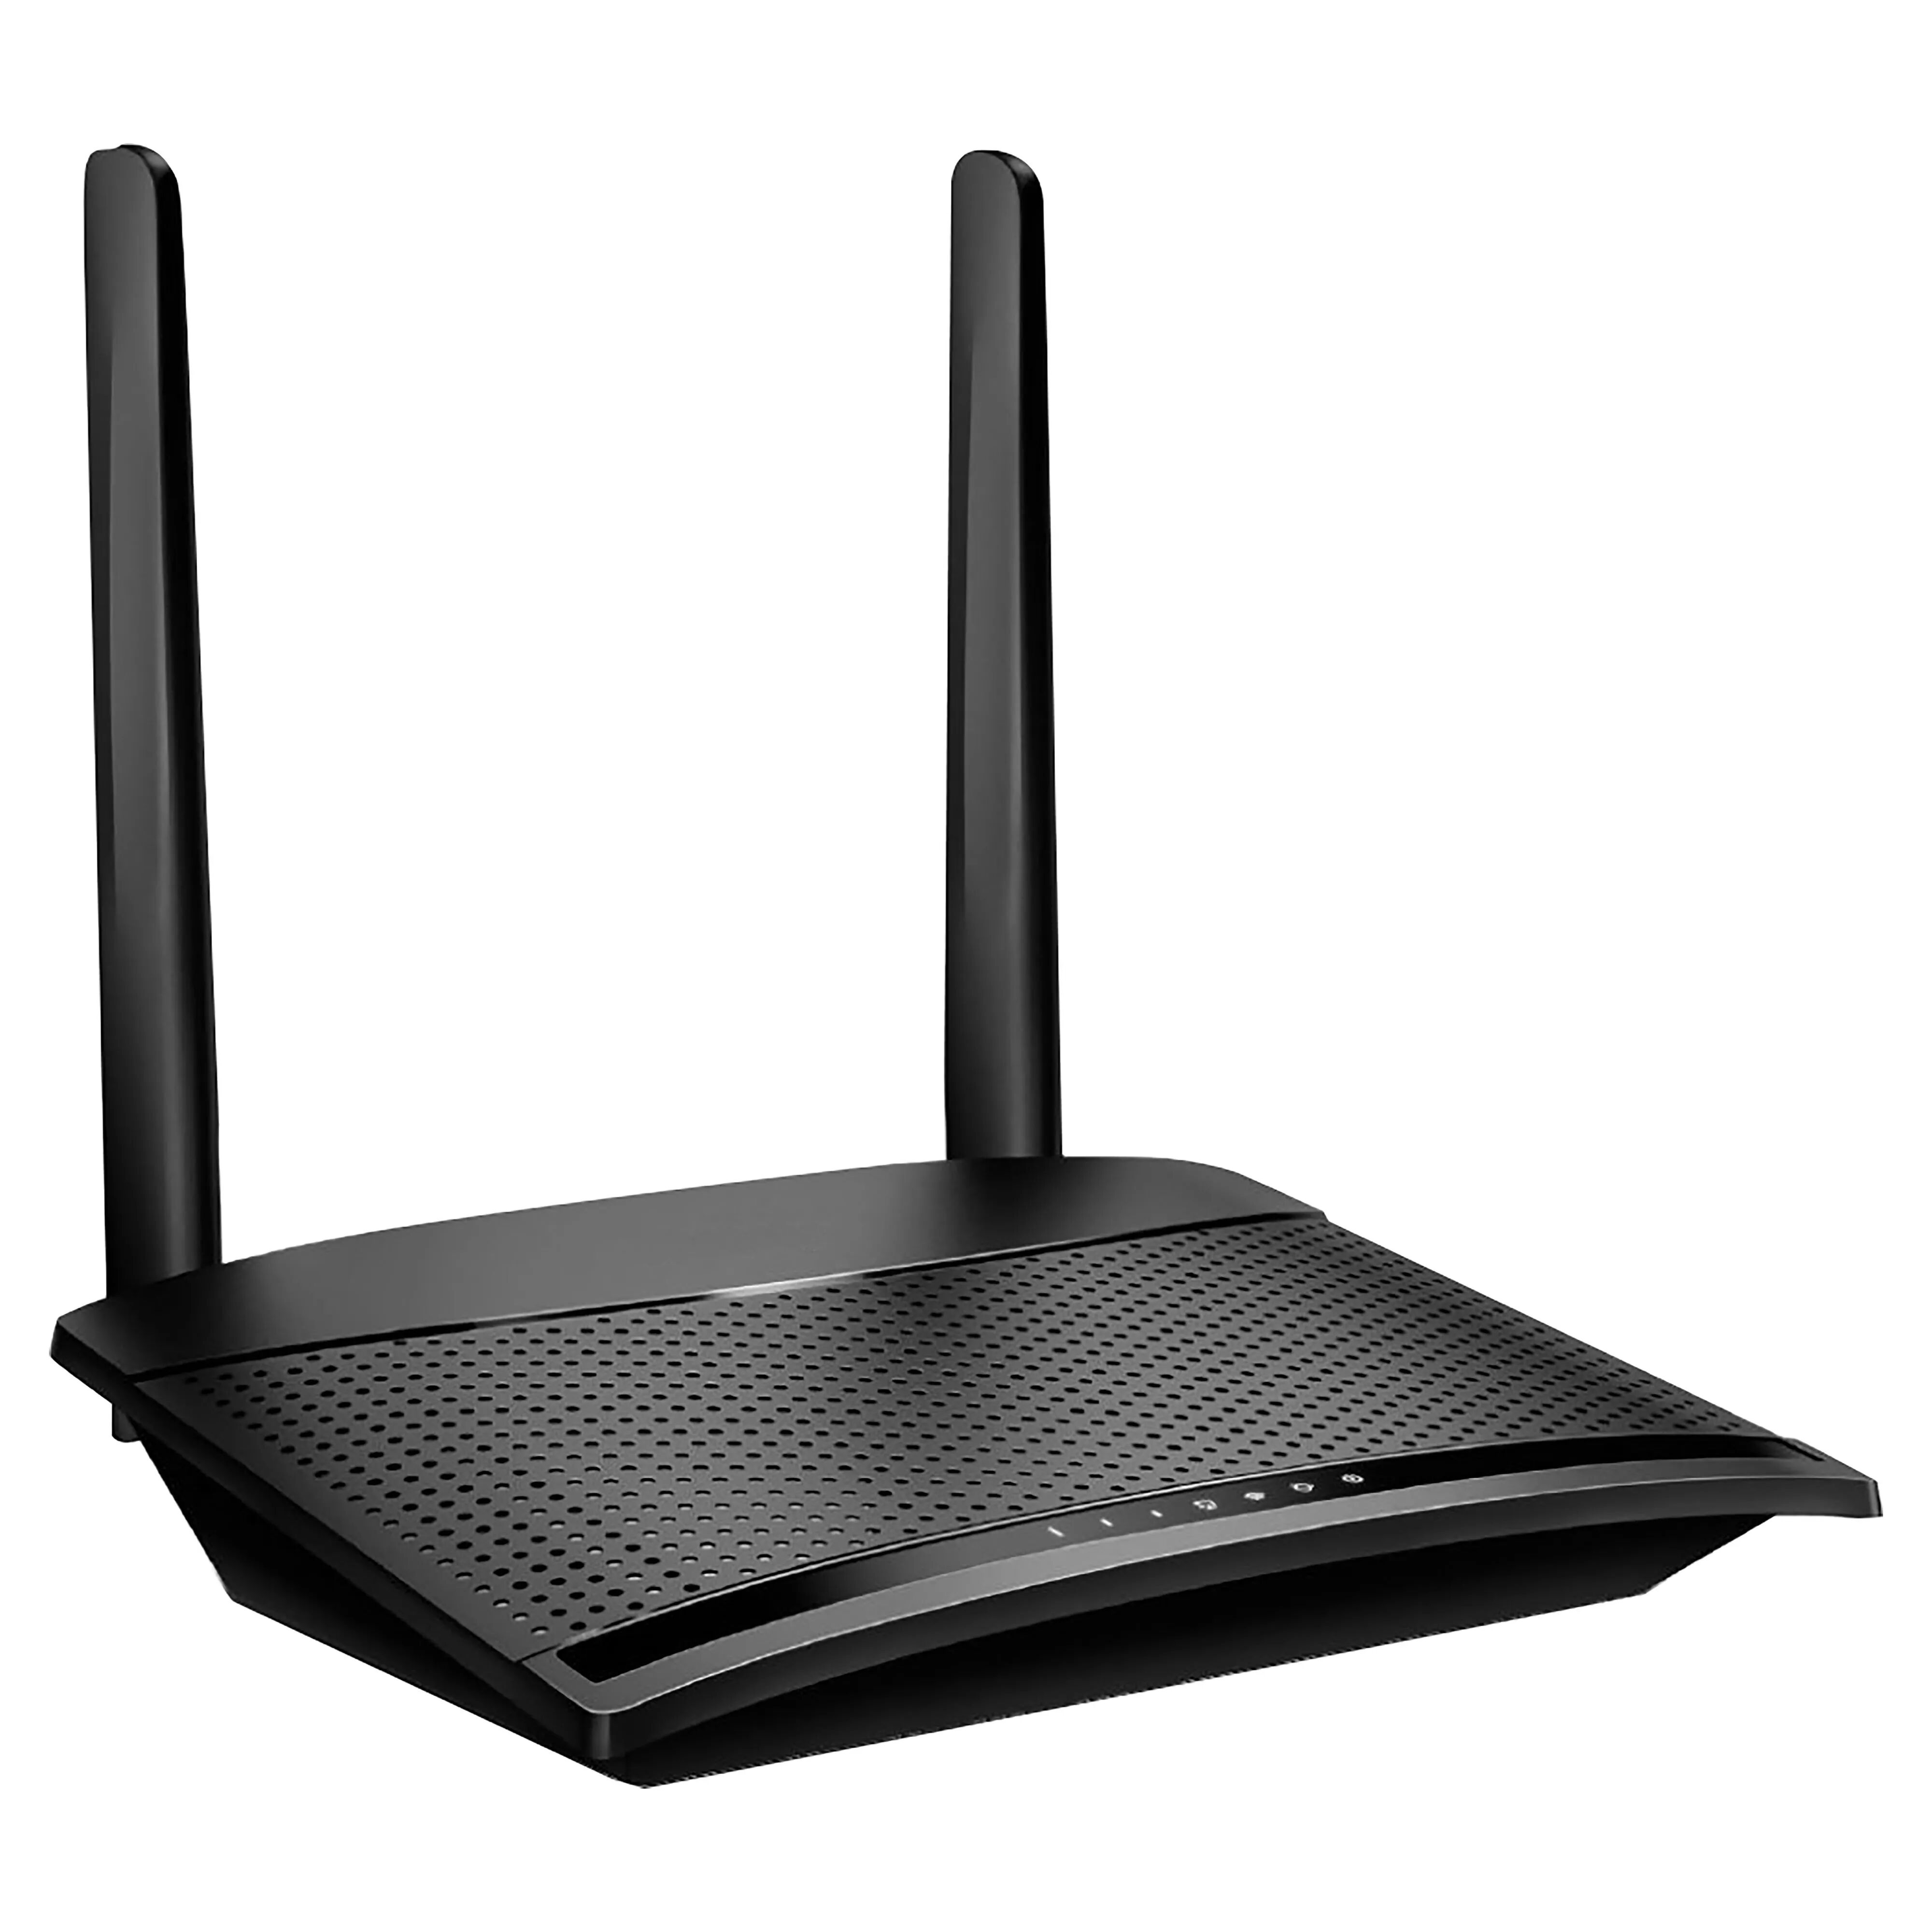 TP-Link Router Tp-Link Wi-Fi 4g Lte 32 Canali Wireless Fino A 300 Mbps Download Fino 150 Mbps